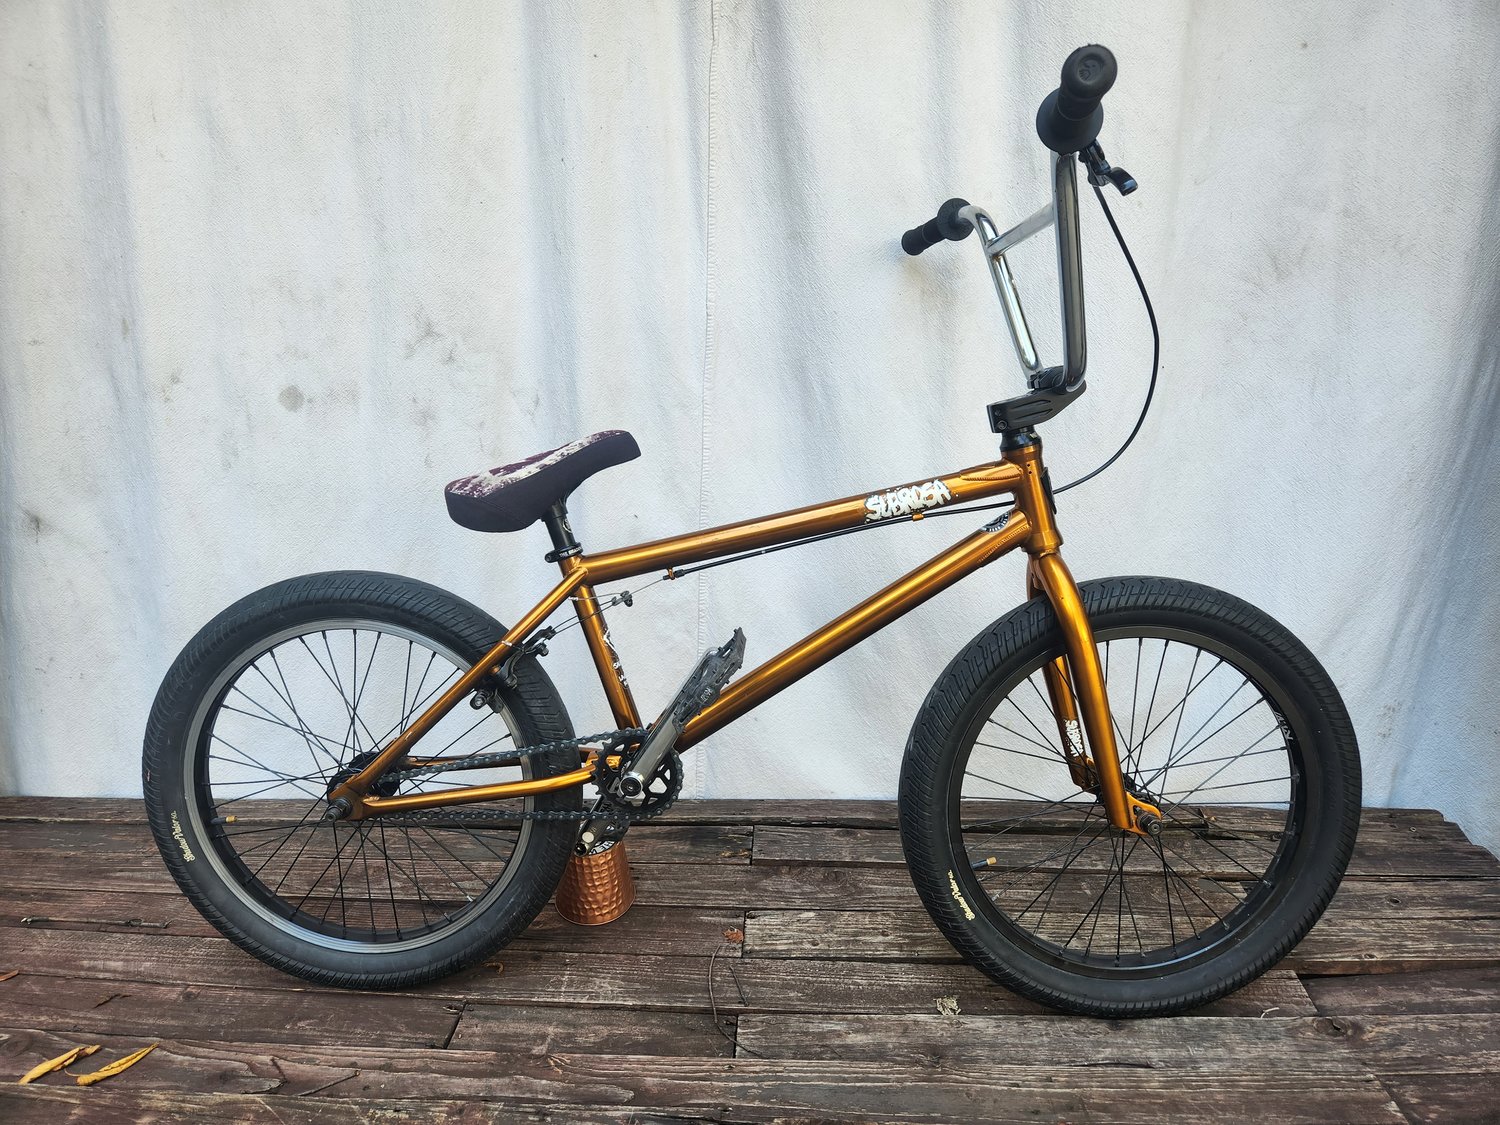 Freewheeler - New FITBIKECO. 2020 models came in today.